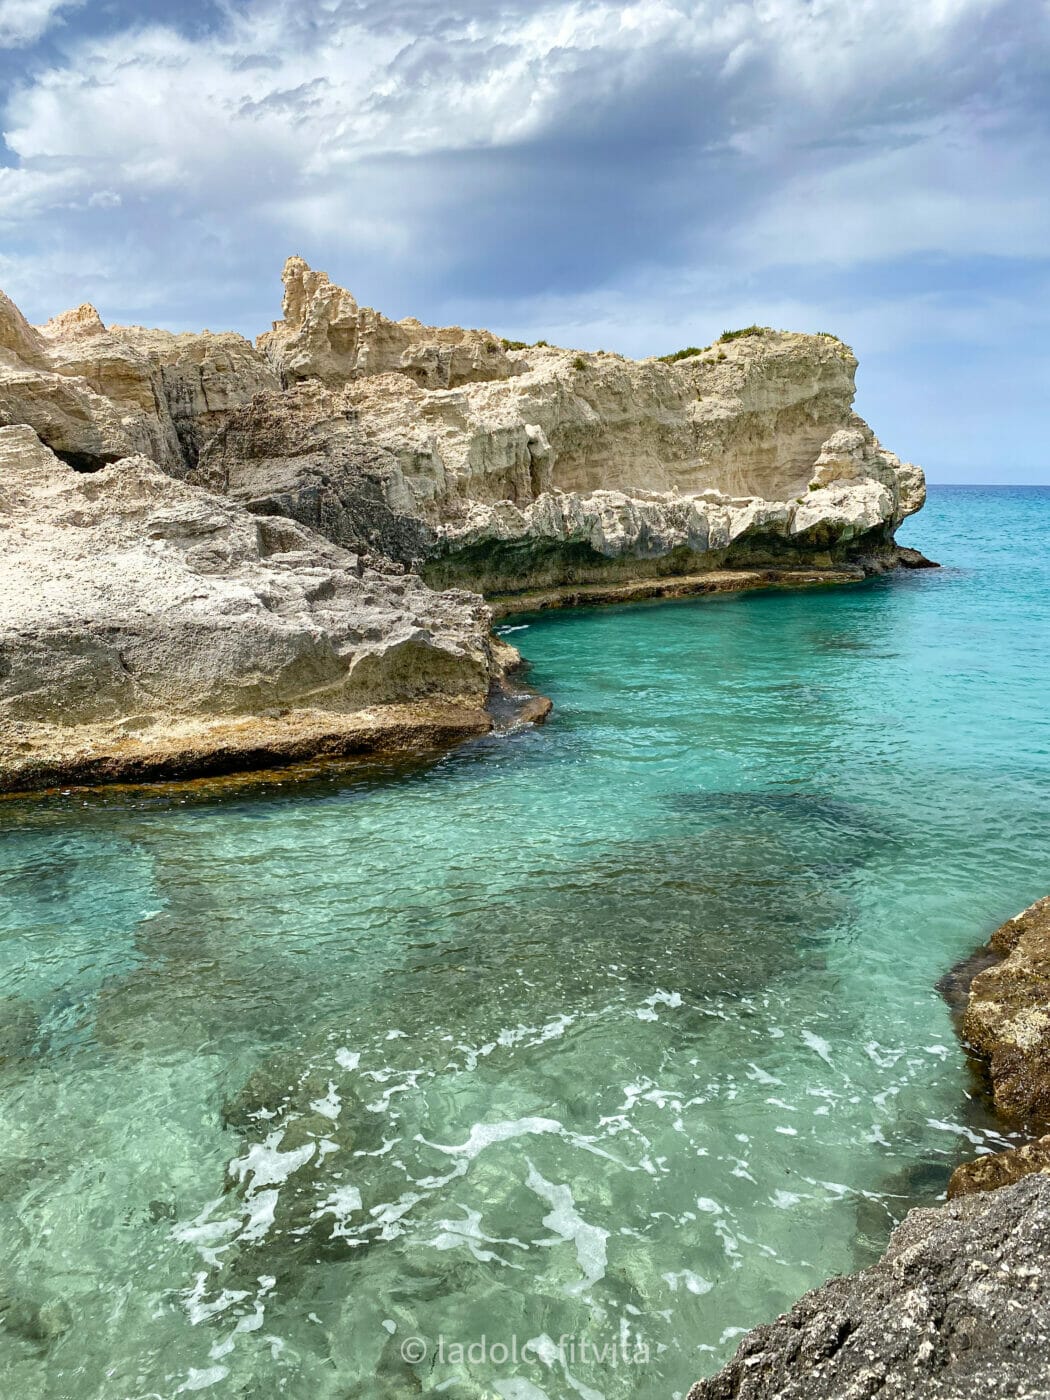 rocky reef in the turquoise waters of riaci beach in Calabria, Italy